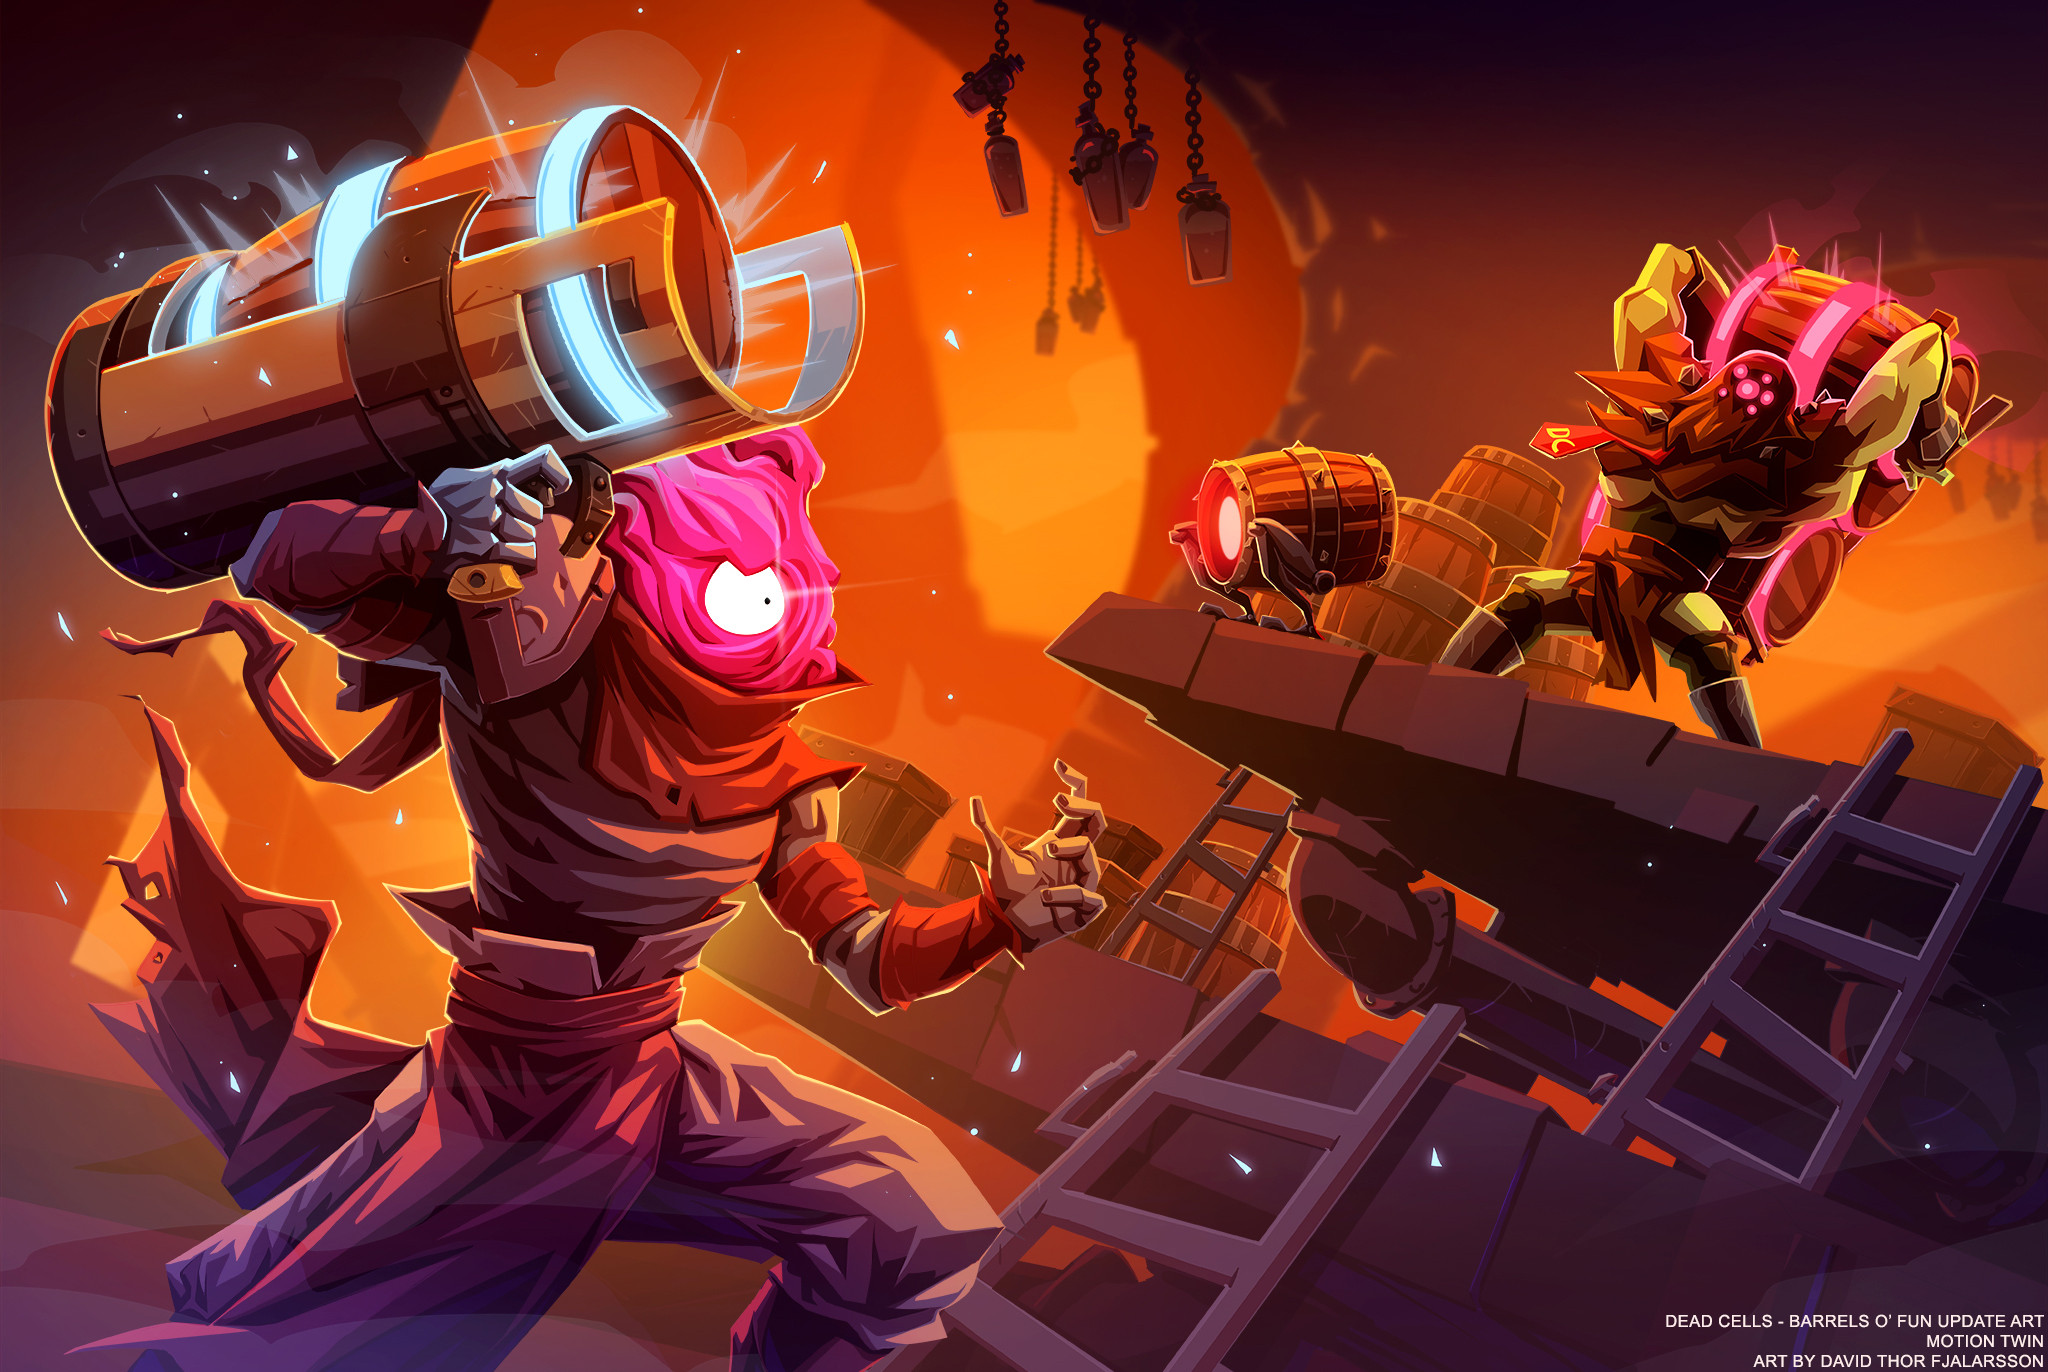 HD wallpaper featuring characters from Dead Cells video game in dynamic action for desktop background.